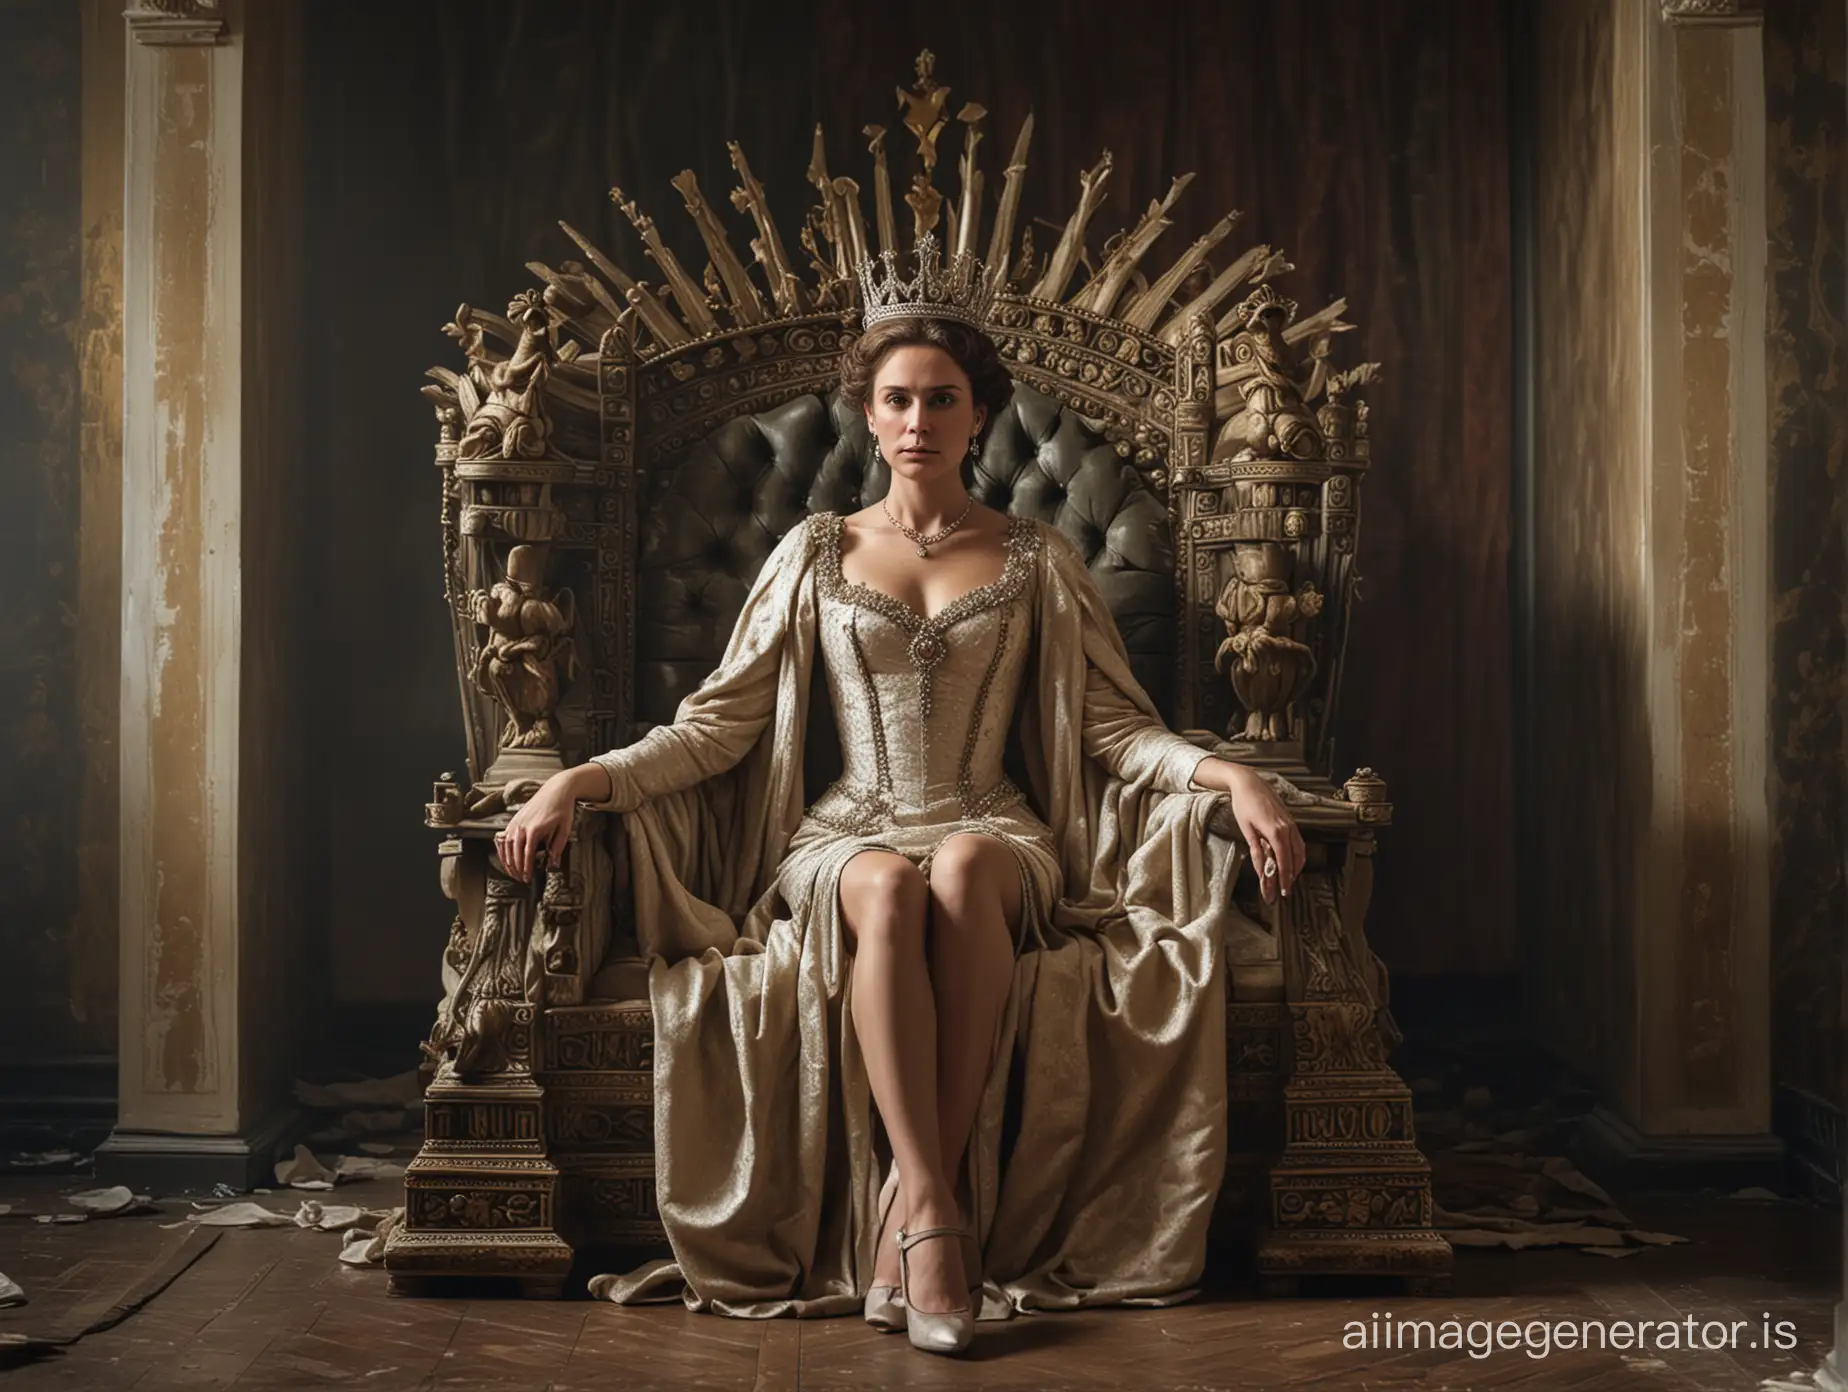 queen in a crown, sitting on the throne, in a bad house